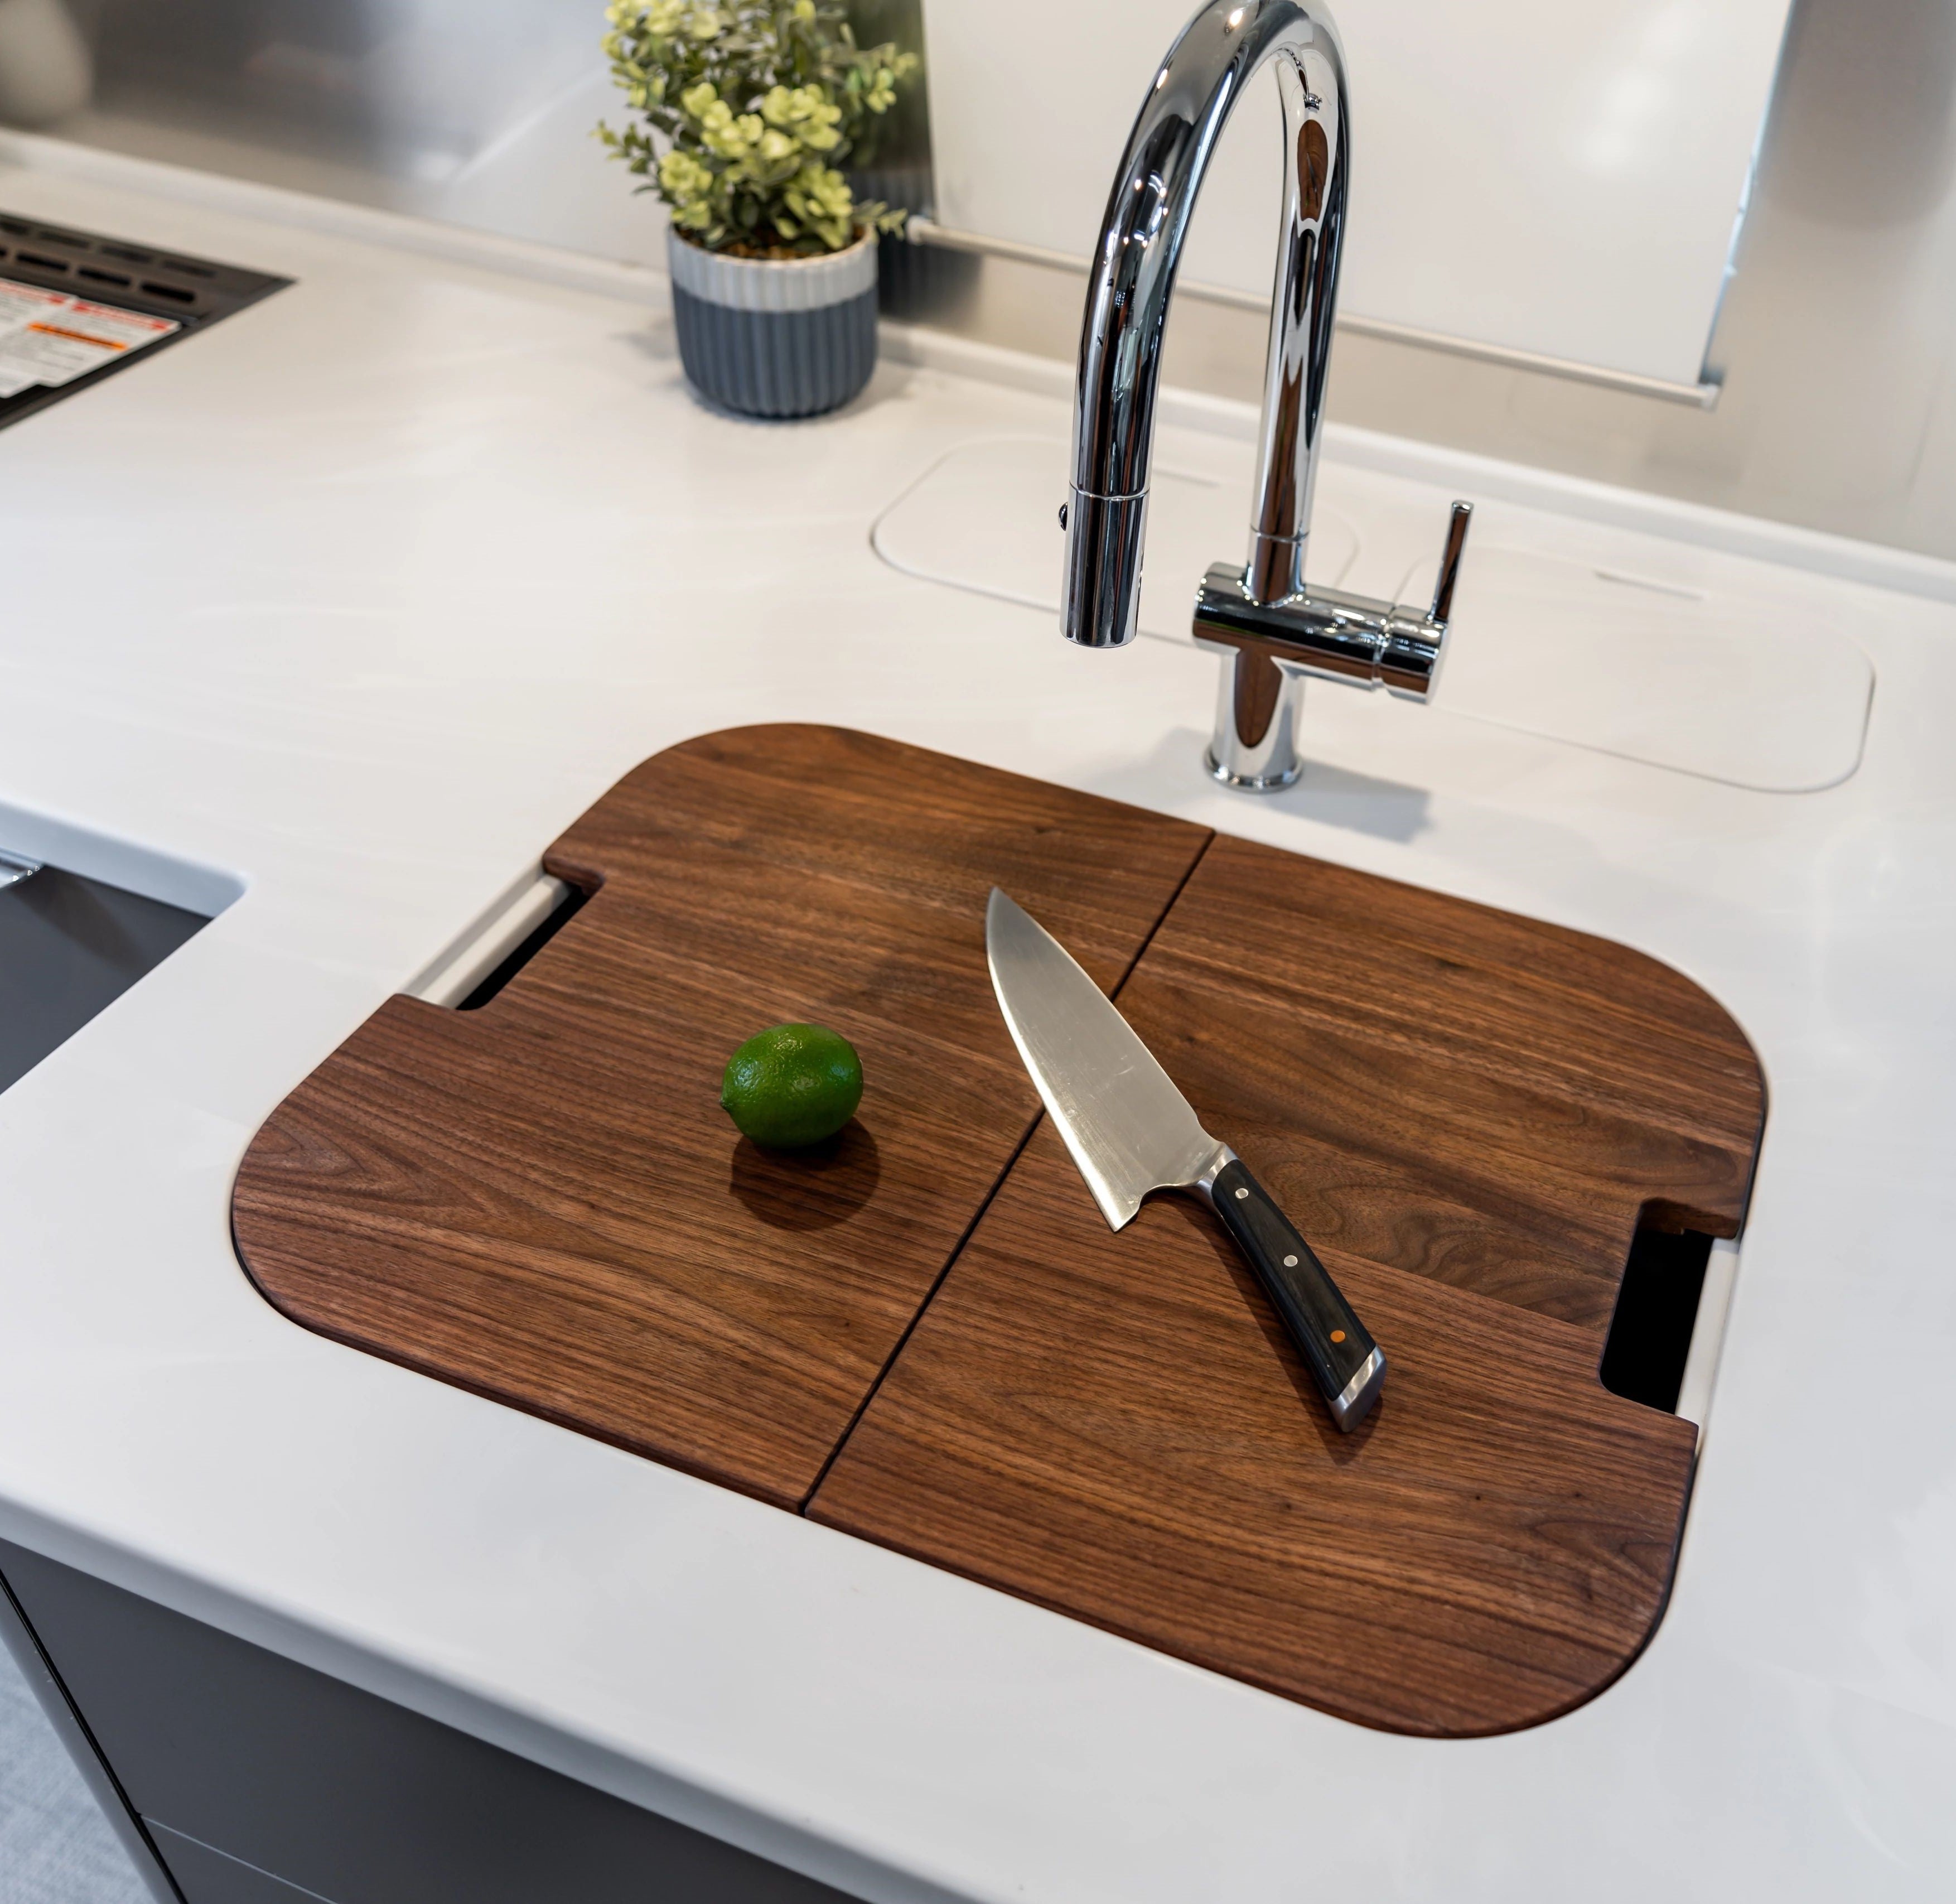 Small Chef Cutting Board Made of Teak